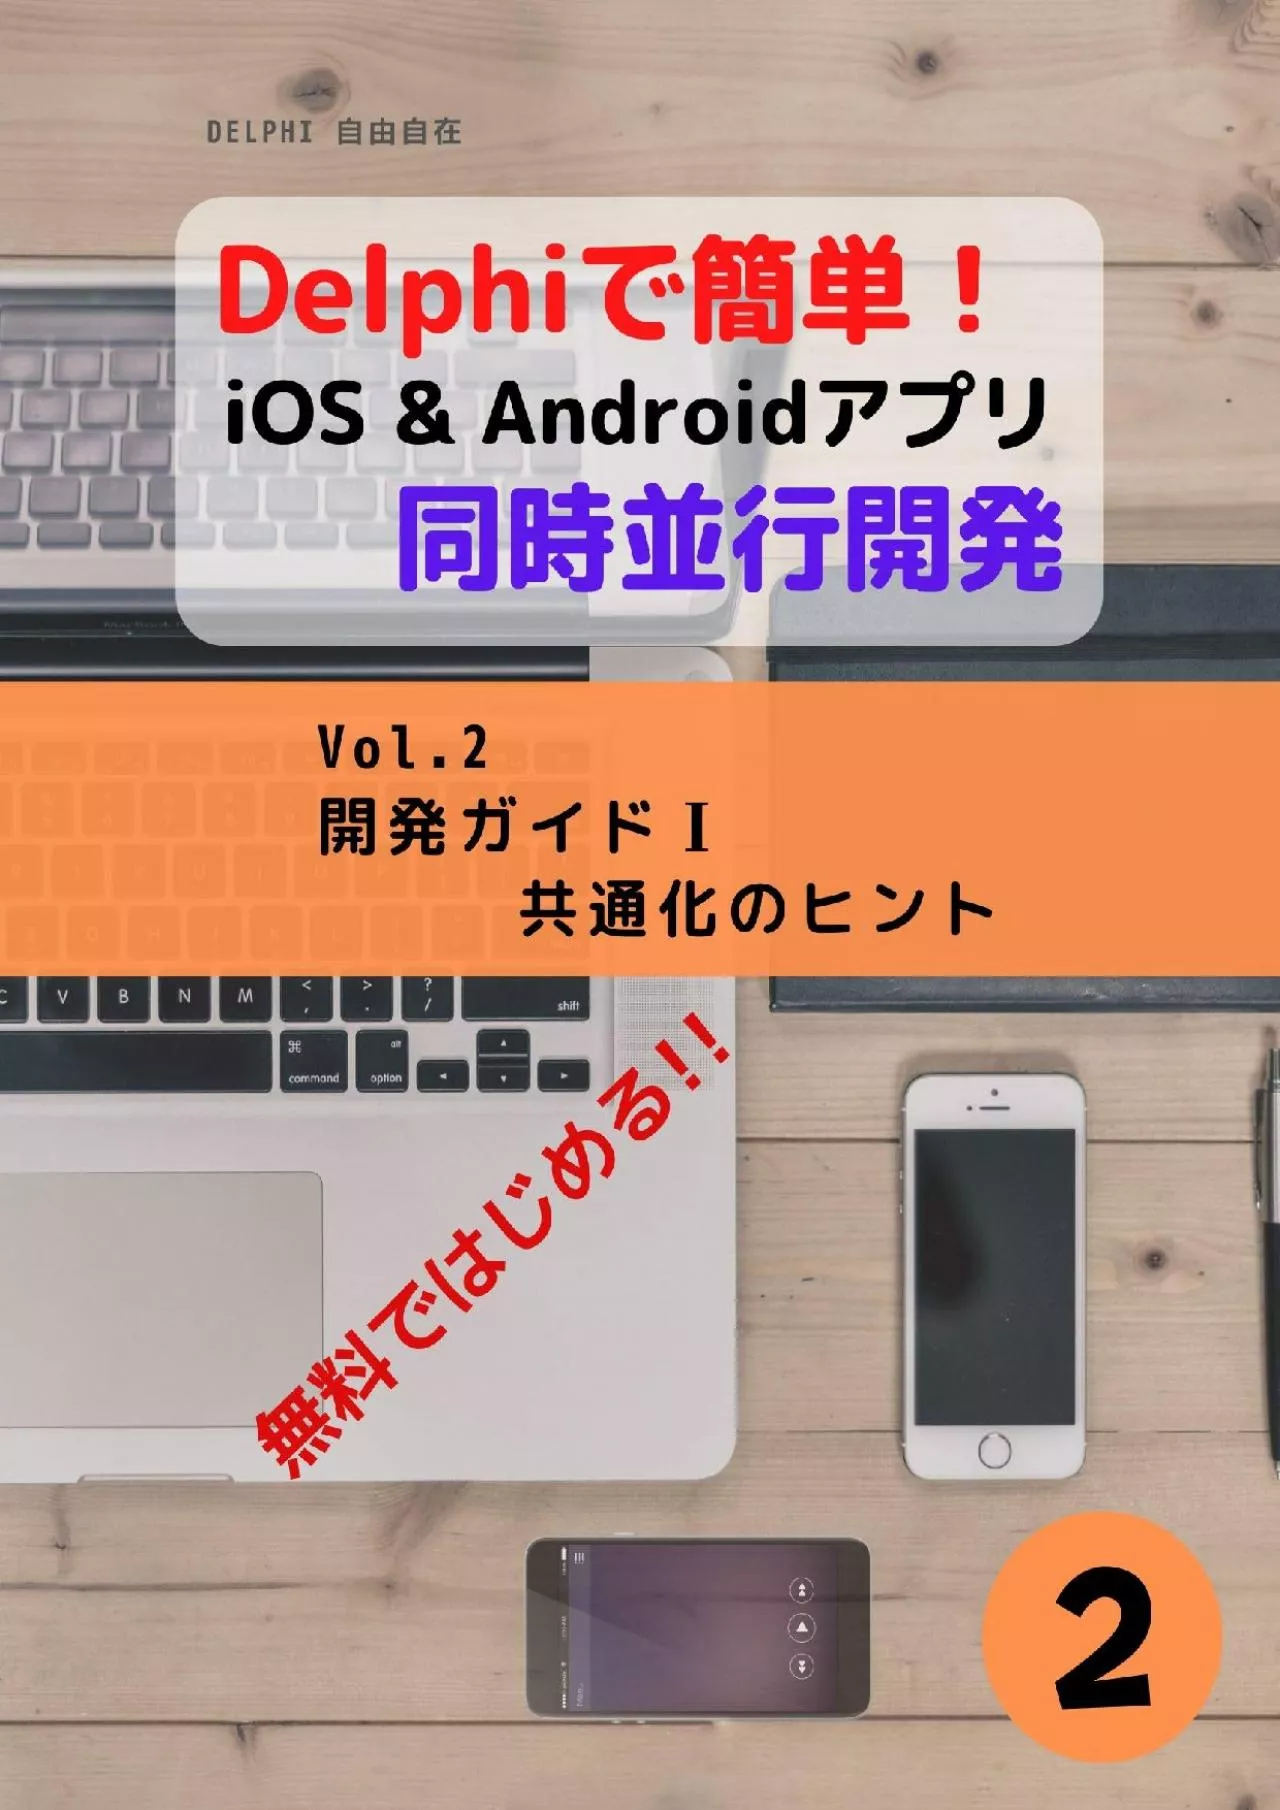 [PDF]-Delphi - Concurrent developments guide for iOS and Android Vol2: Development guide